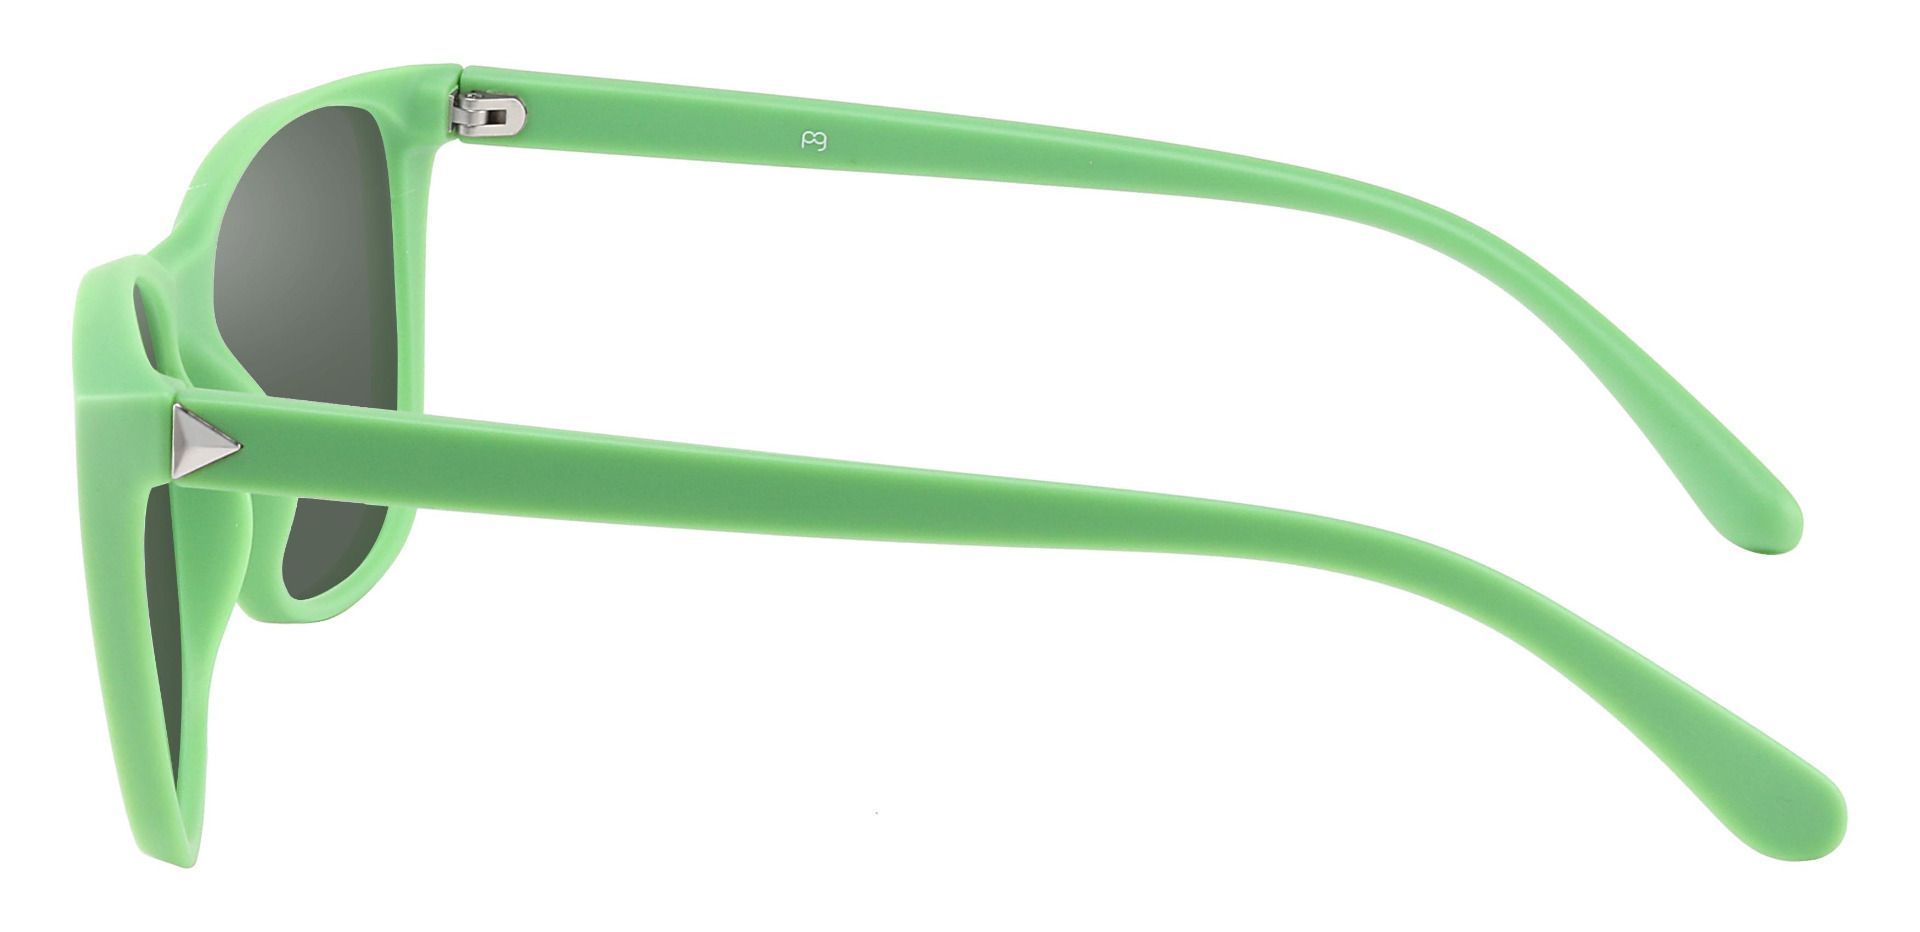 Hickory Square Reading Sunglasses - Green Frame With Green Lenses